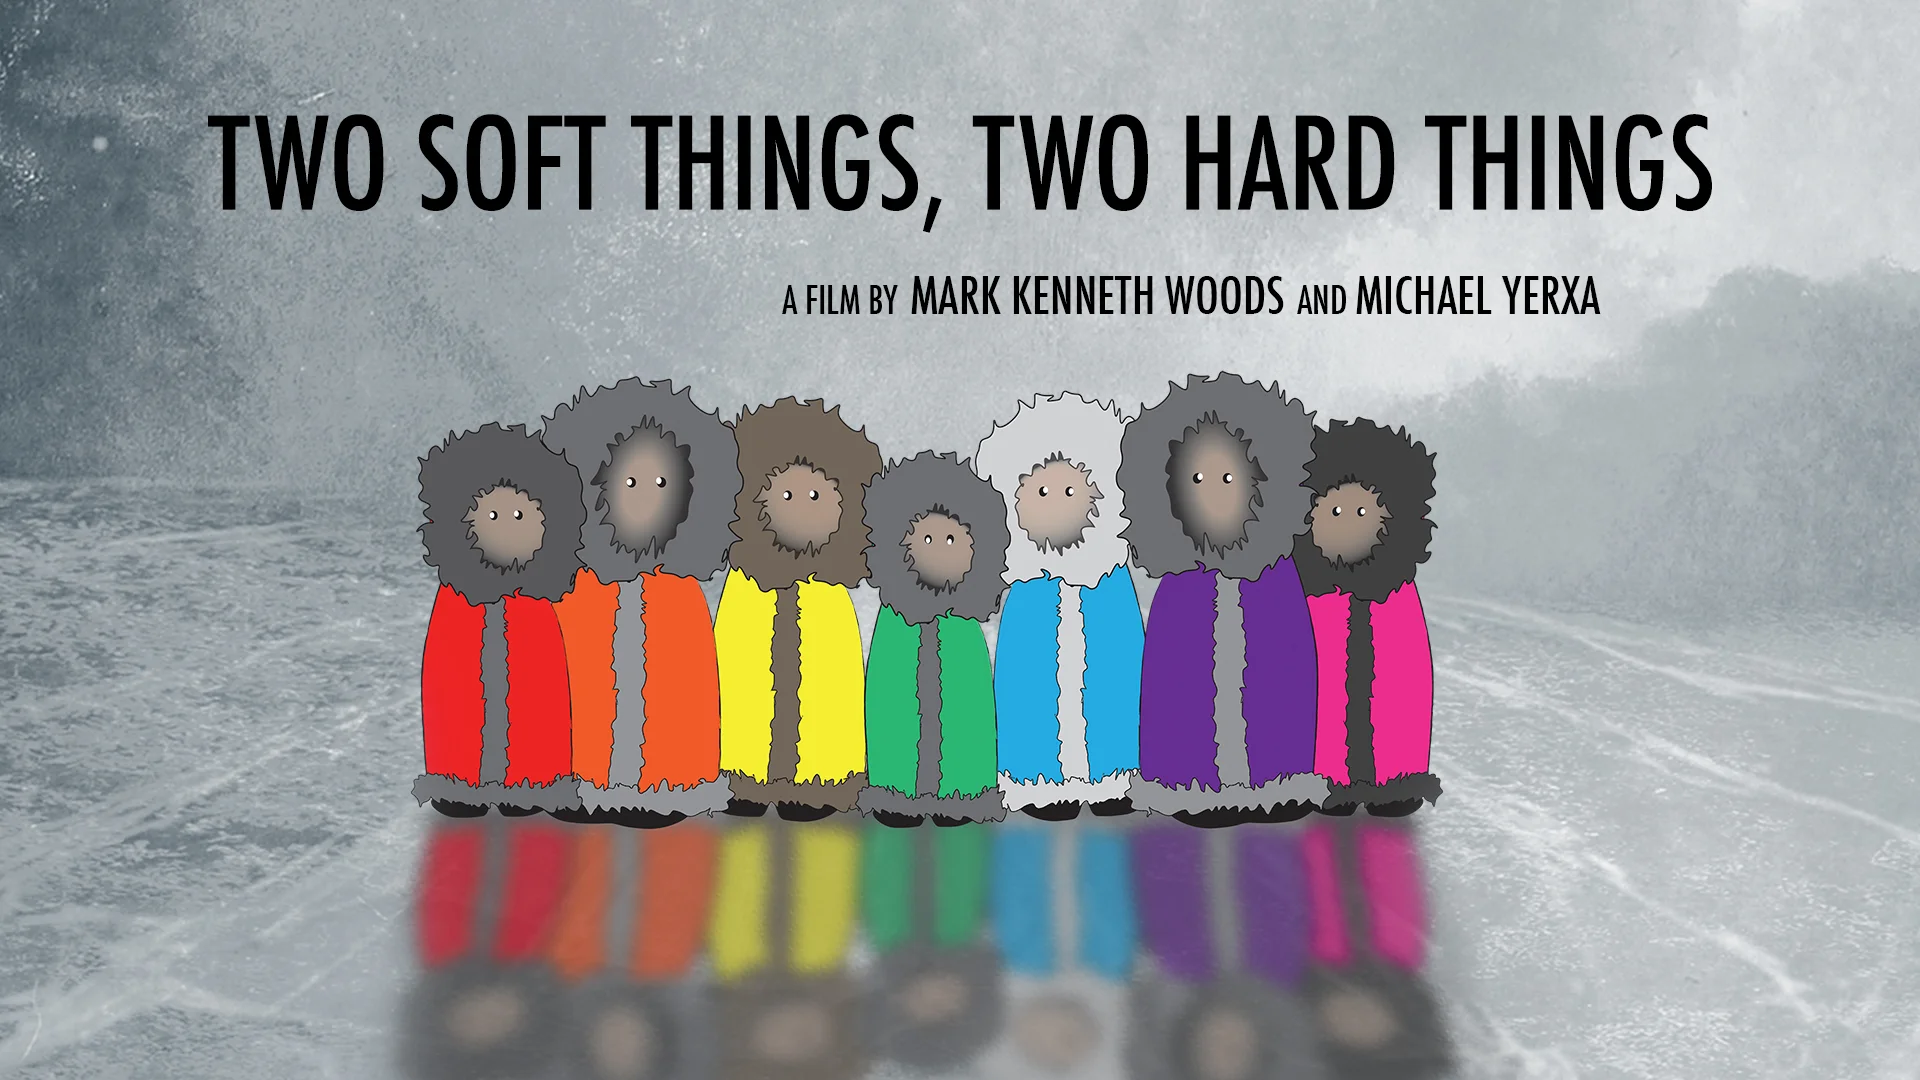 Second thing second. Soft things. Two things. Many Soft things.